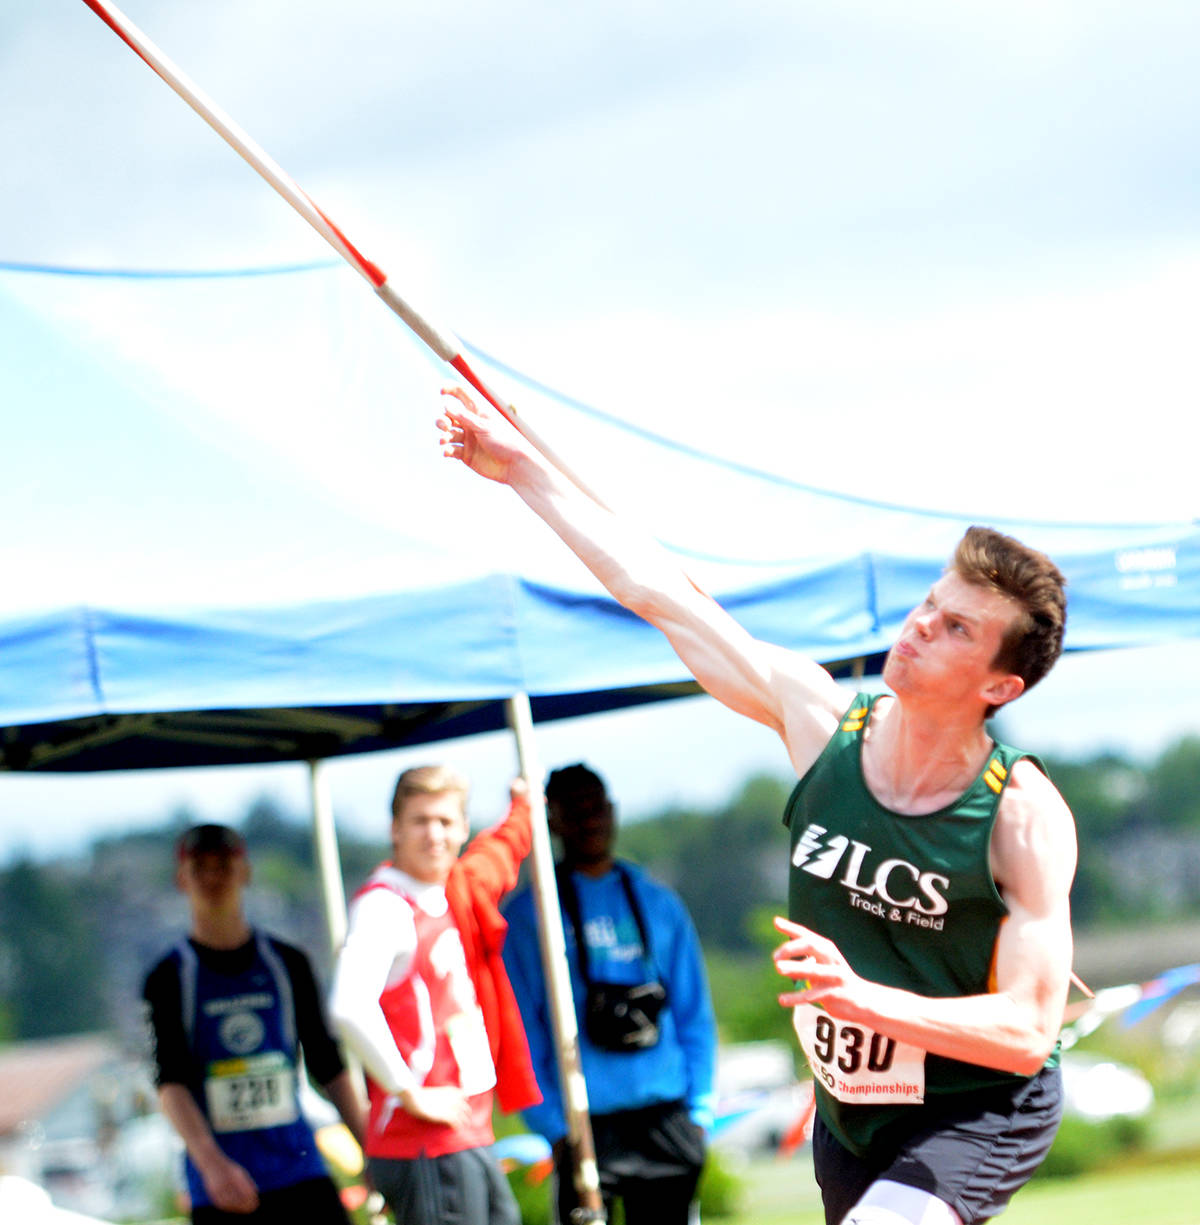 VIDEO: High school track and field championships begin